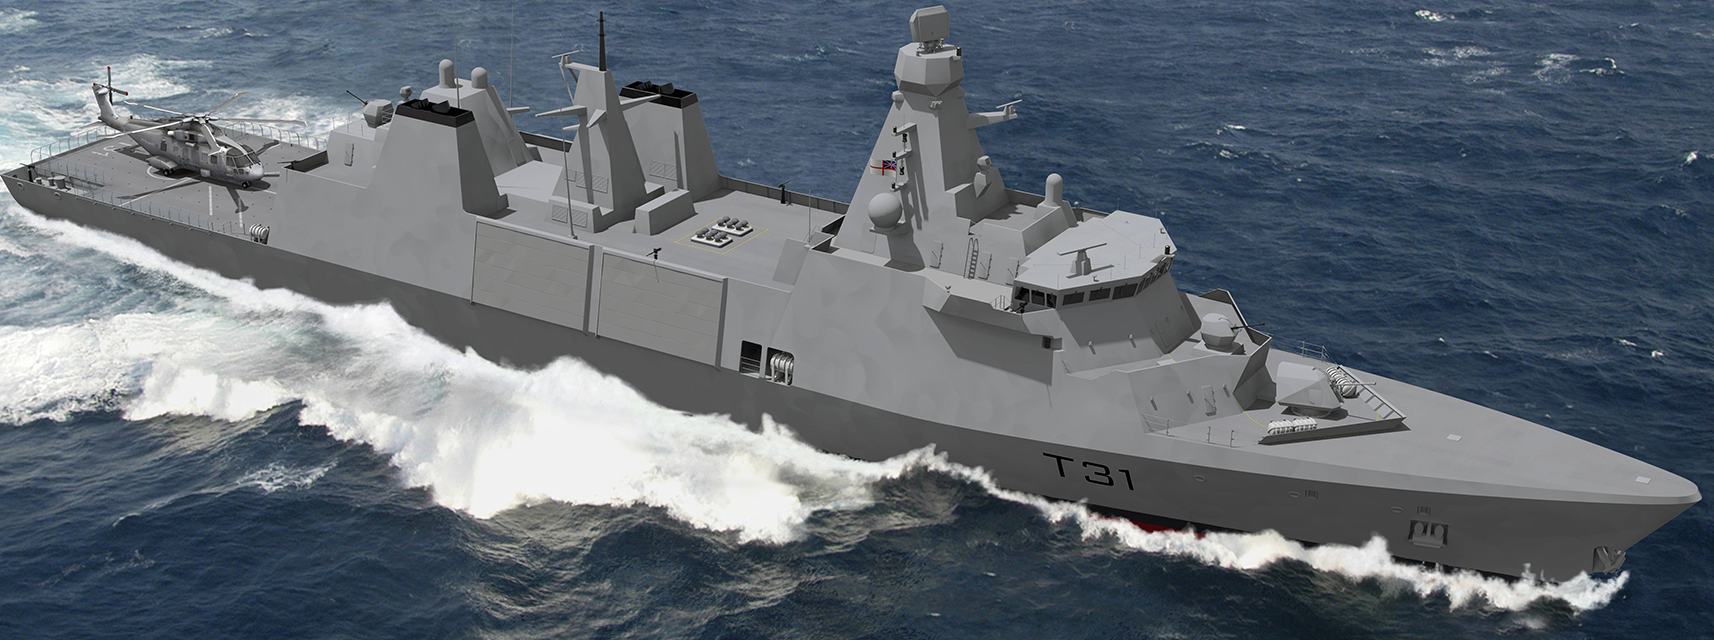 Thales to Provide Royal Navy with T31 Combat Management system for T31 Frigate